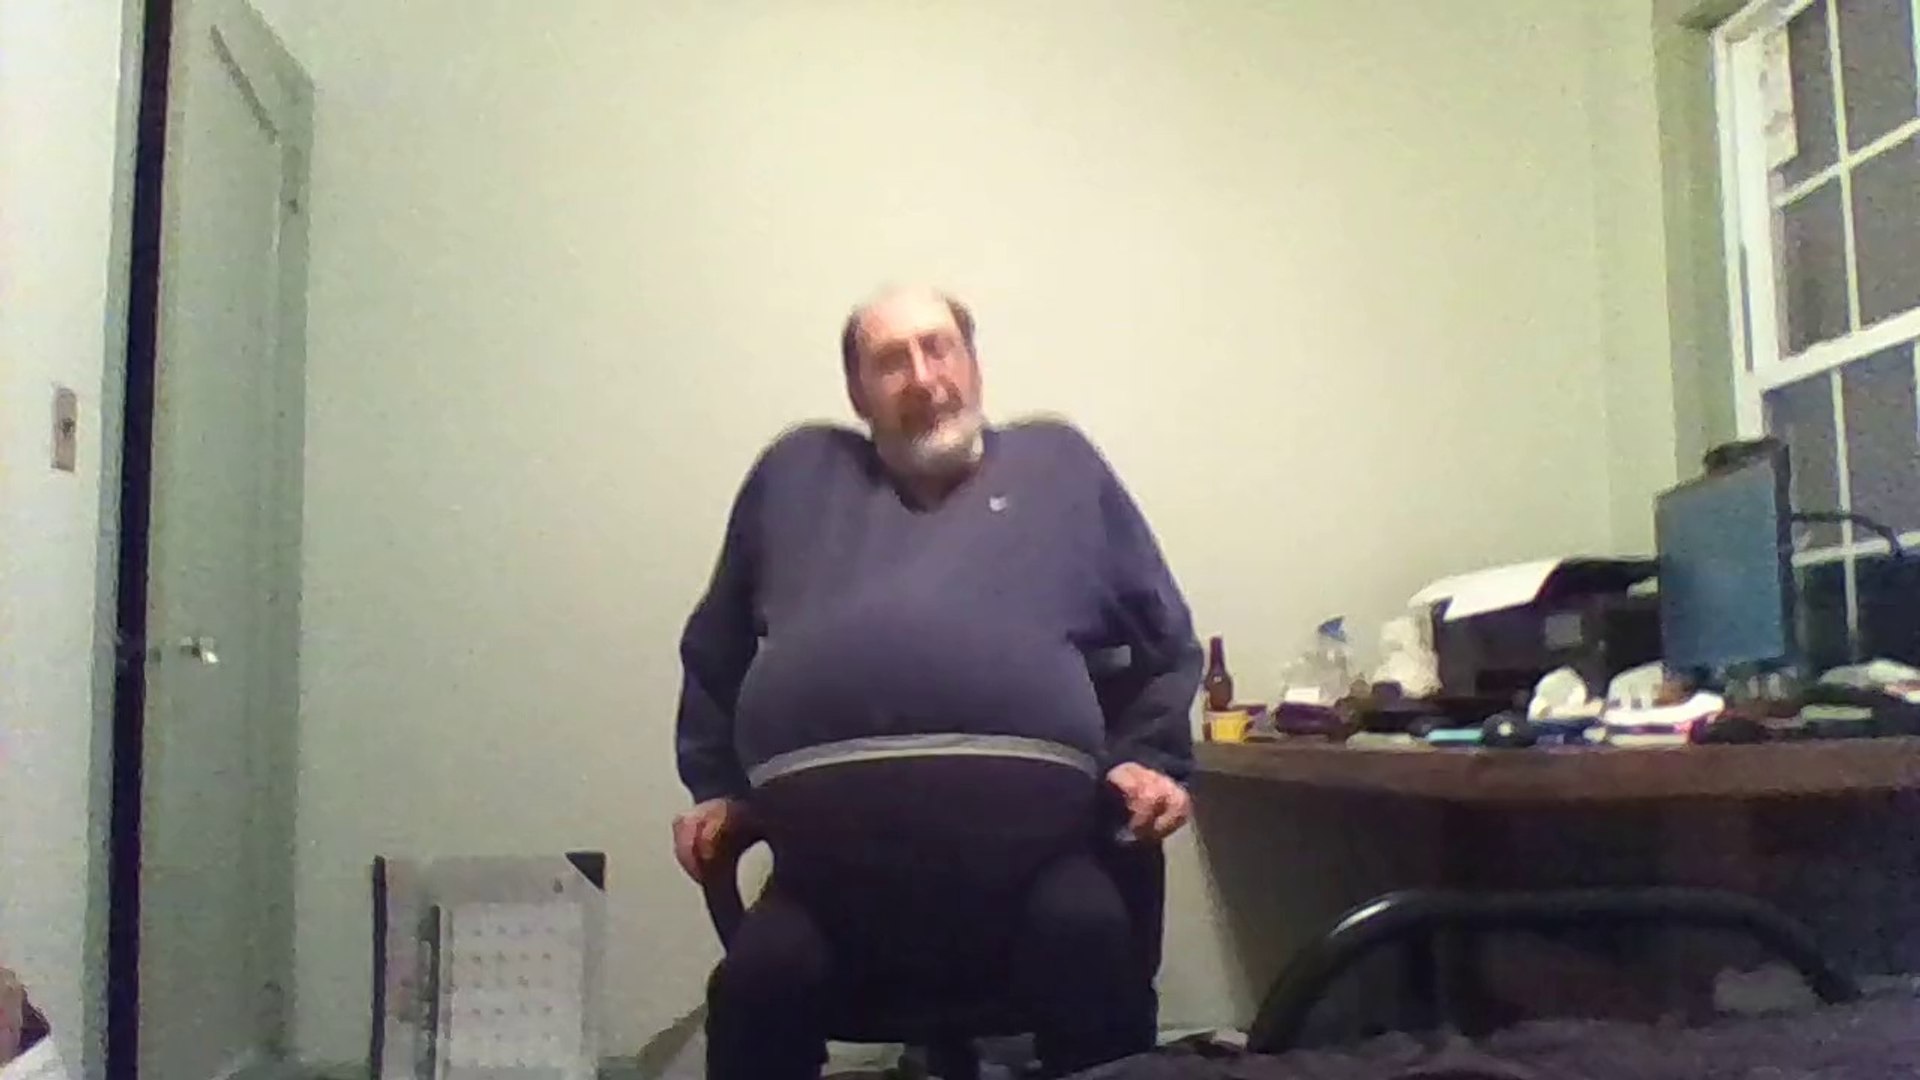 big Belly inflation fun! by Richie Marro - Dailymotion